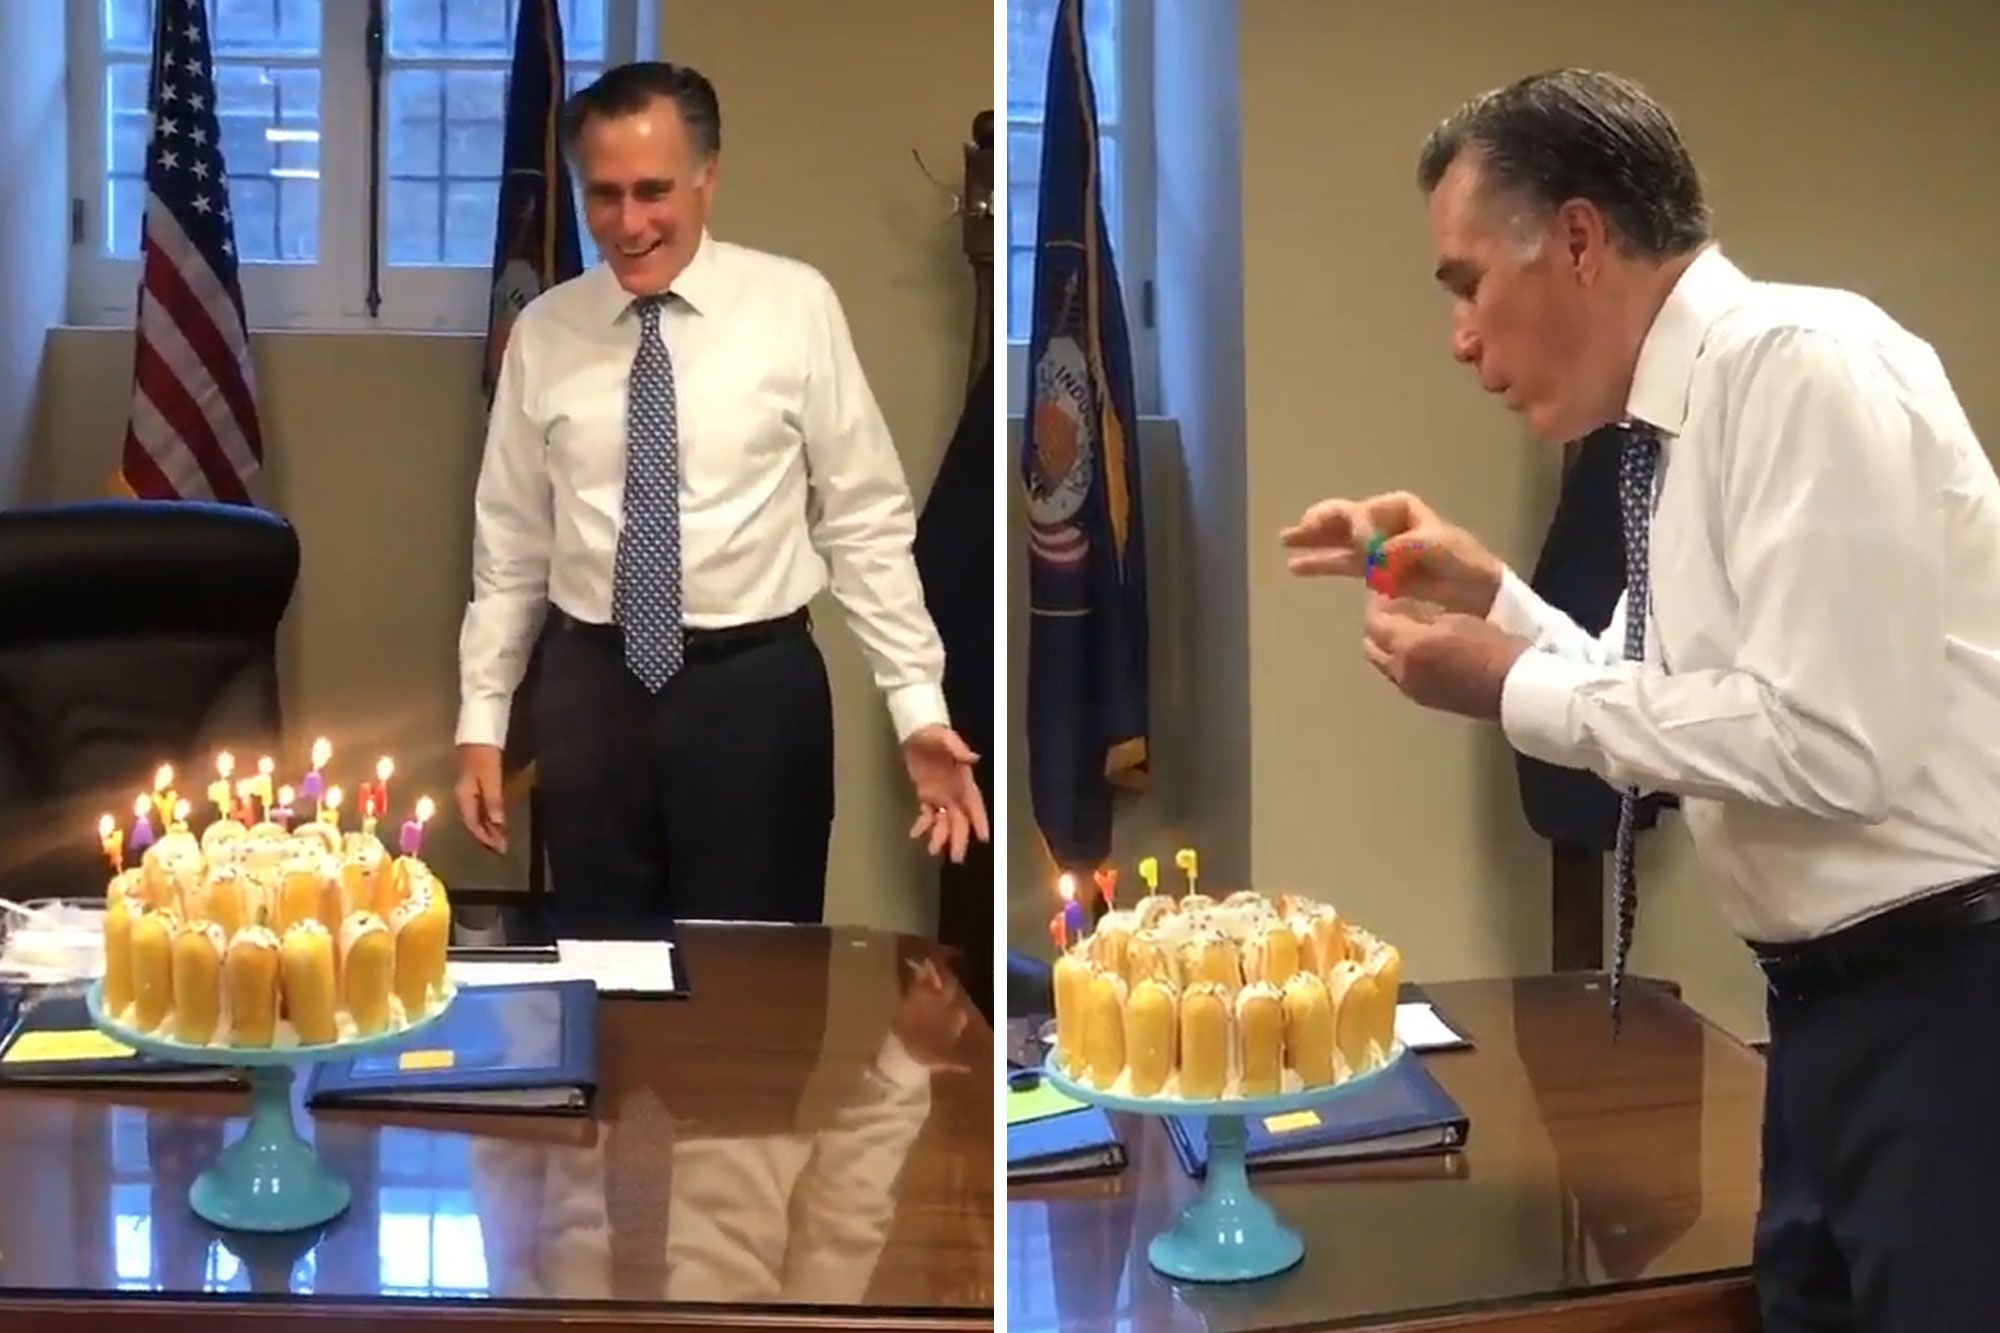 Mitt Romney blows out his candles in the most Romney way possible